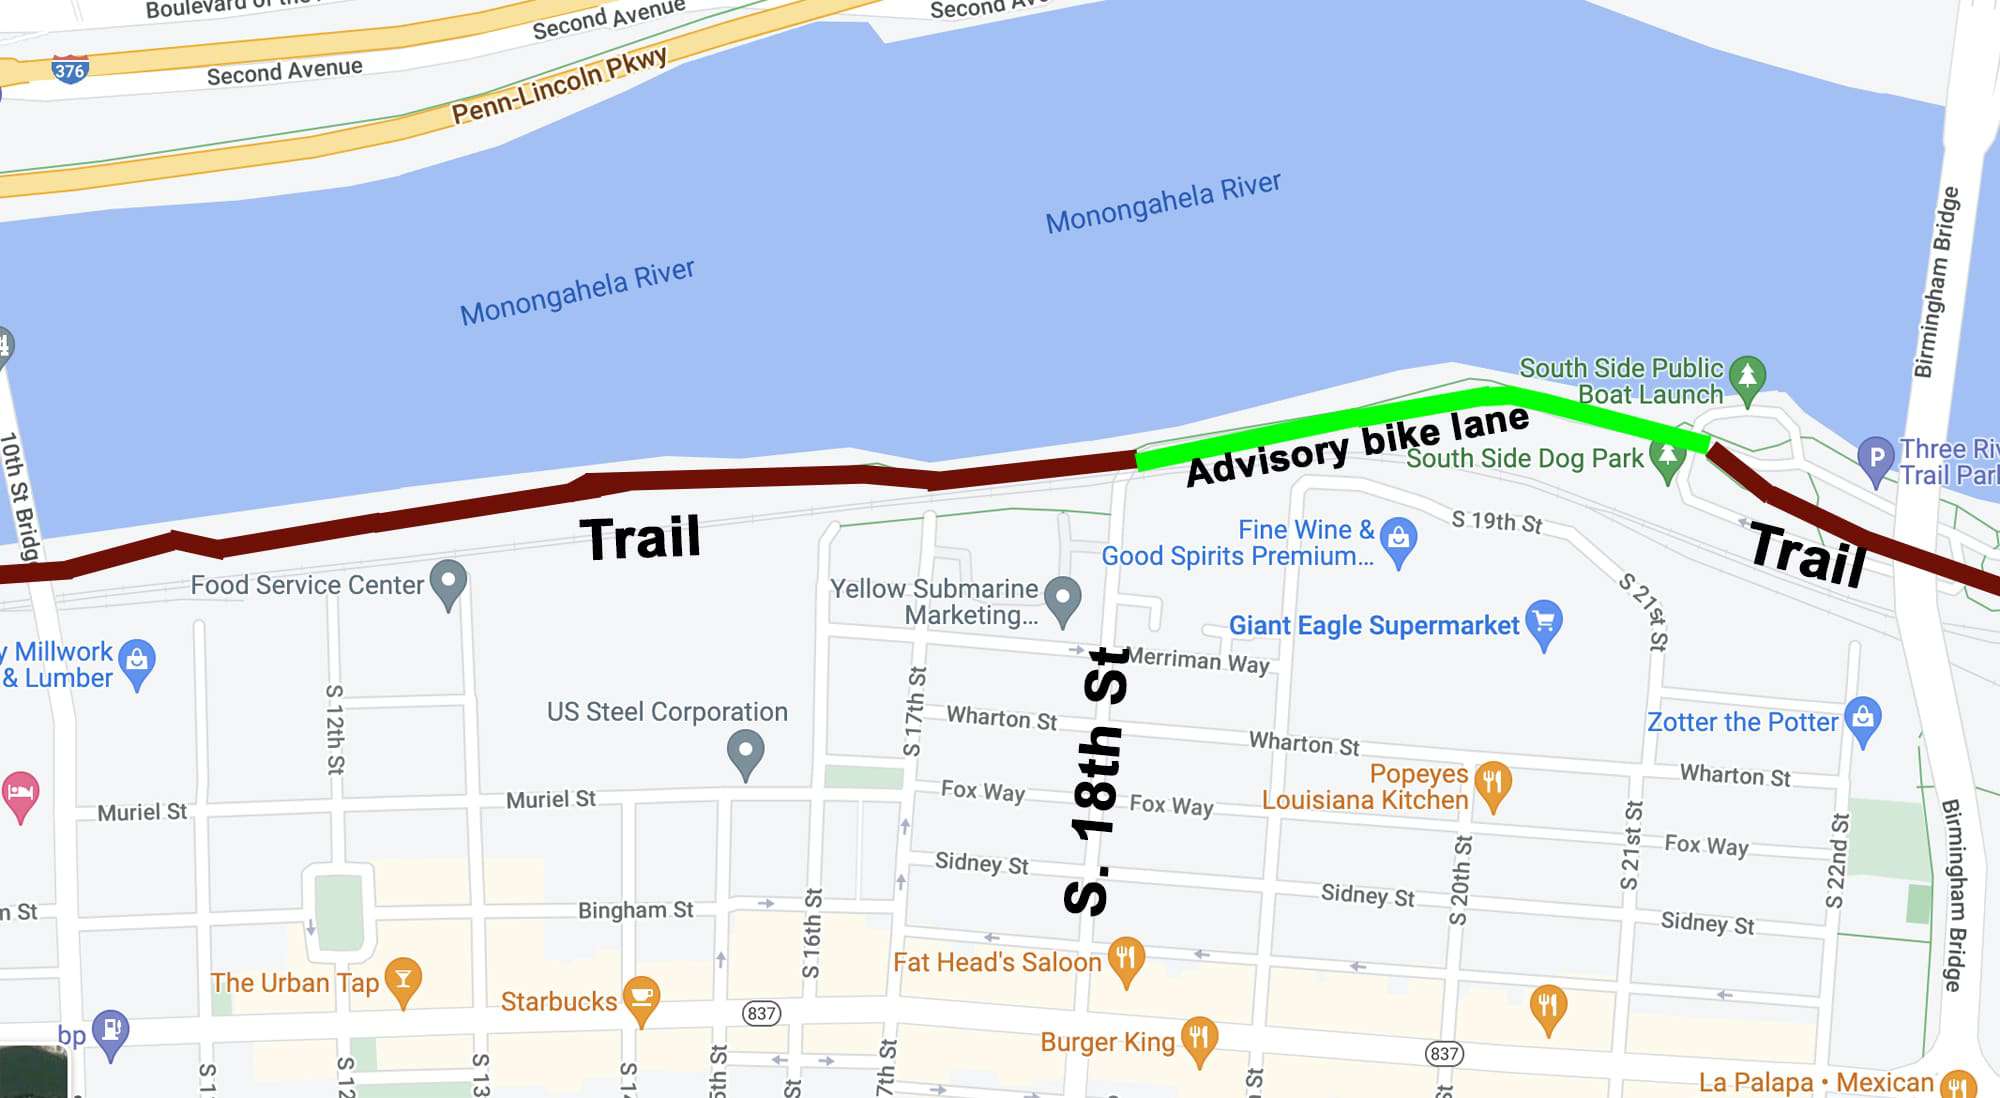 Image is a map of the South Side showing the location of the advisory bike lane.